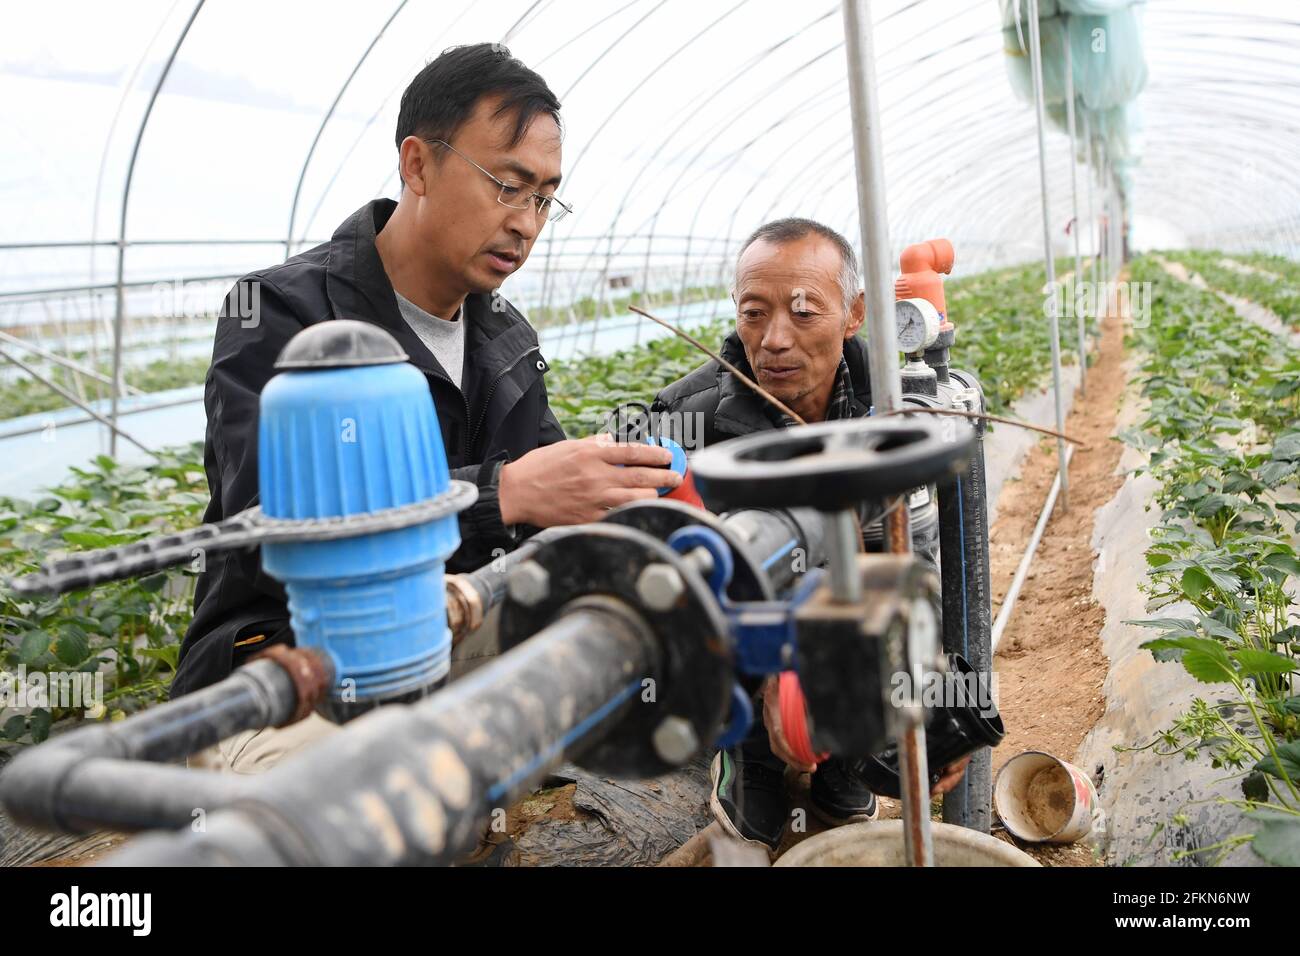 (210503) -- TIANSHUI, May 3, 2021 (Xinhua) -- Zhang Shuhao (L) learns about the operational condition of a strawberry greenhouse from a villager in Mudan Township, Tianshui City of northwest China's Gansu Province, on April 27, 2021. Zhang Shuhao, 42, quit his well-paid job three years ago to start an agriculture company with a few partners sharing the same vision at a mountainous village in Mudan Township, Tianshui City. In three years, Xinghuarong, Zhang's company, contracted 6,200 mu (about 413 hectares) of idle arable lands, where terraced fields, greenhouses, and a reservoir have been bu Stock Photo